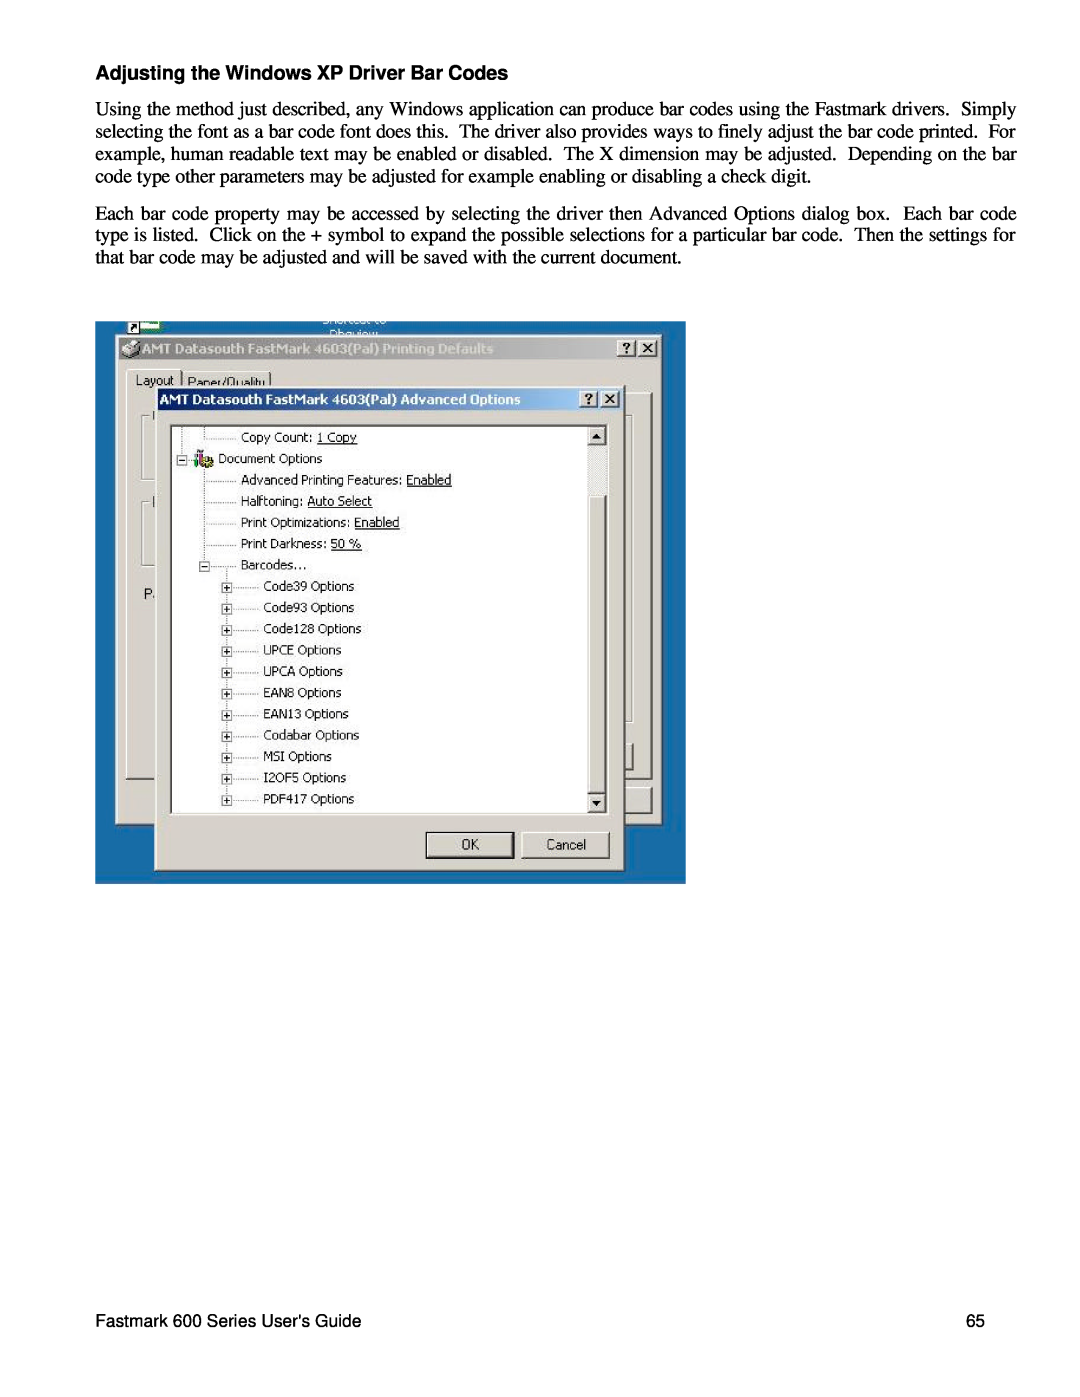 AMT Datasouth manual Adjusting the Windows XP Driver Bar Codes, Fastmark 600 Series Users Guide 